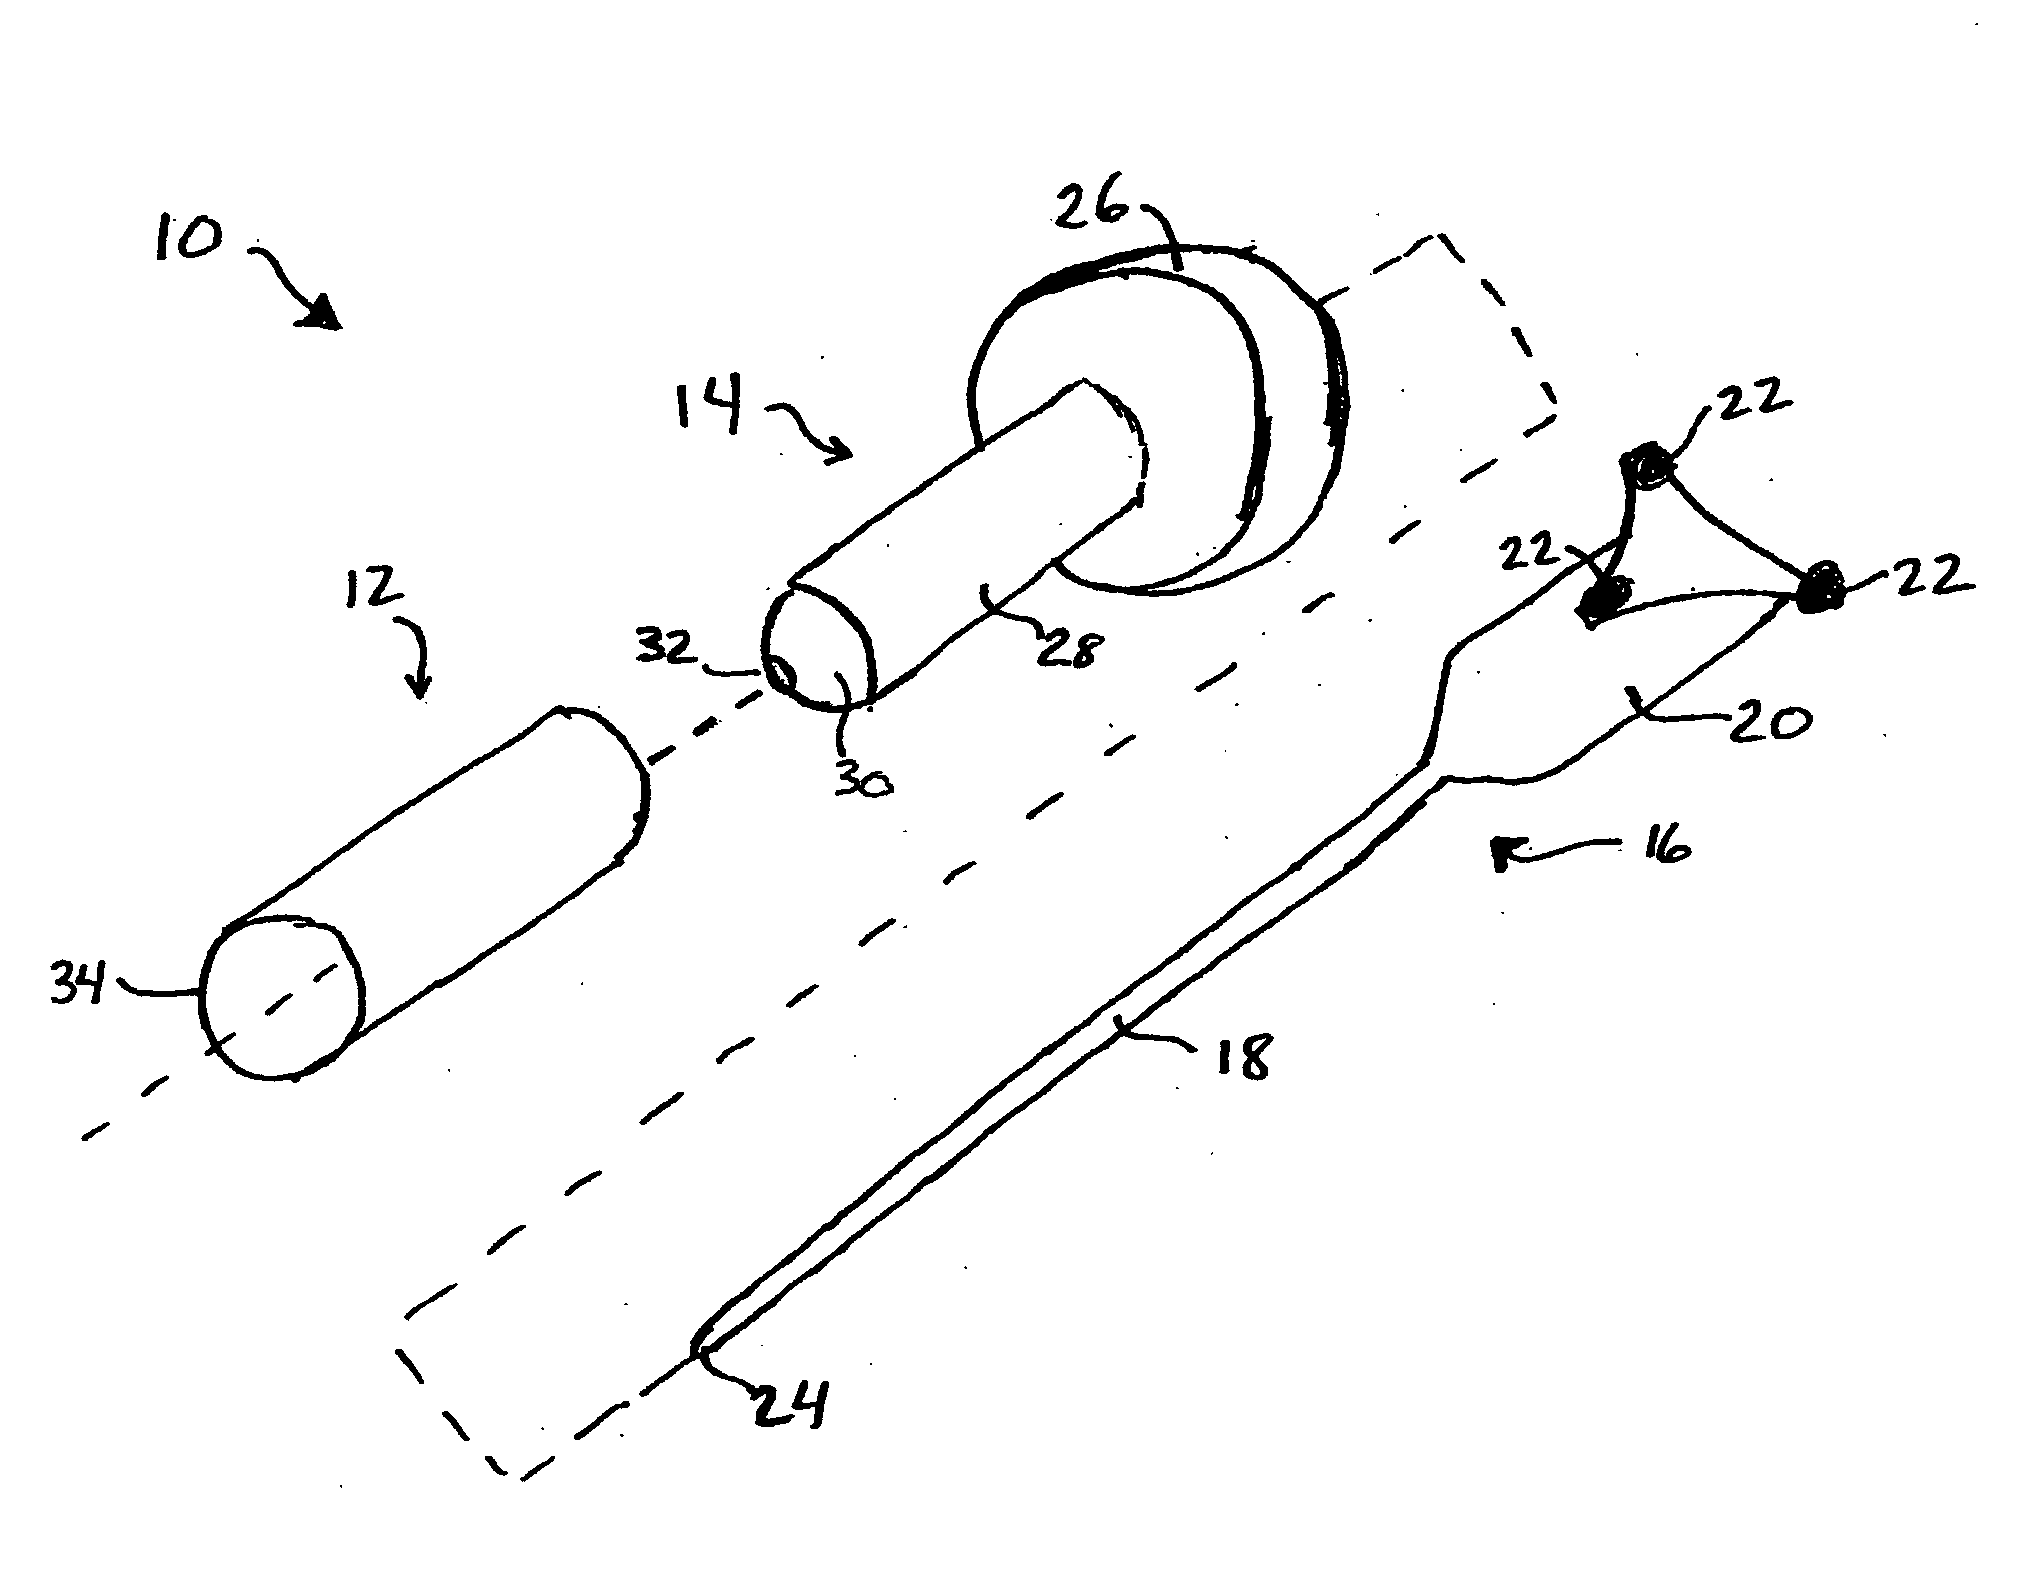 Apparatus and methods for performing brain surgery